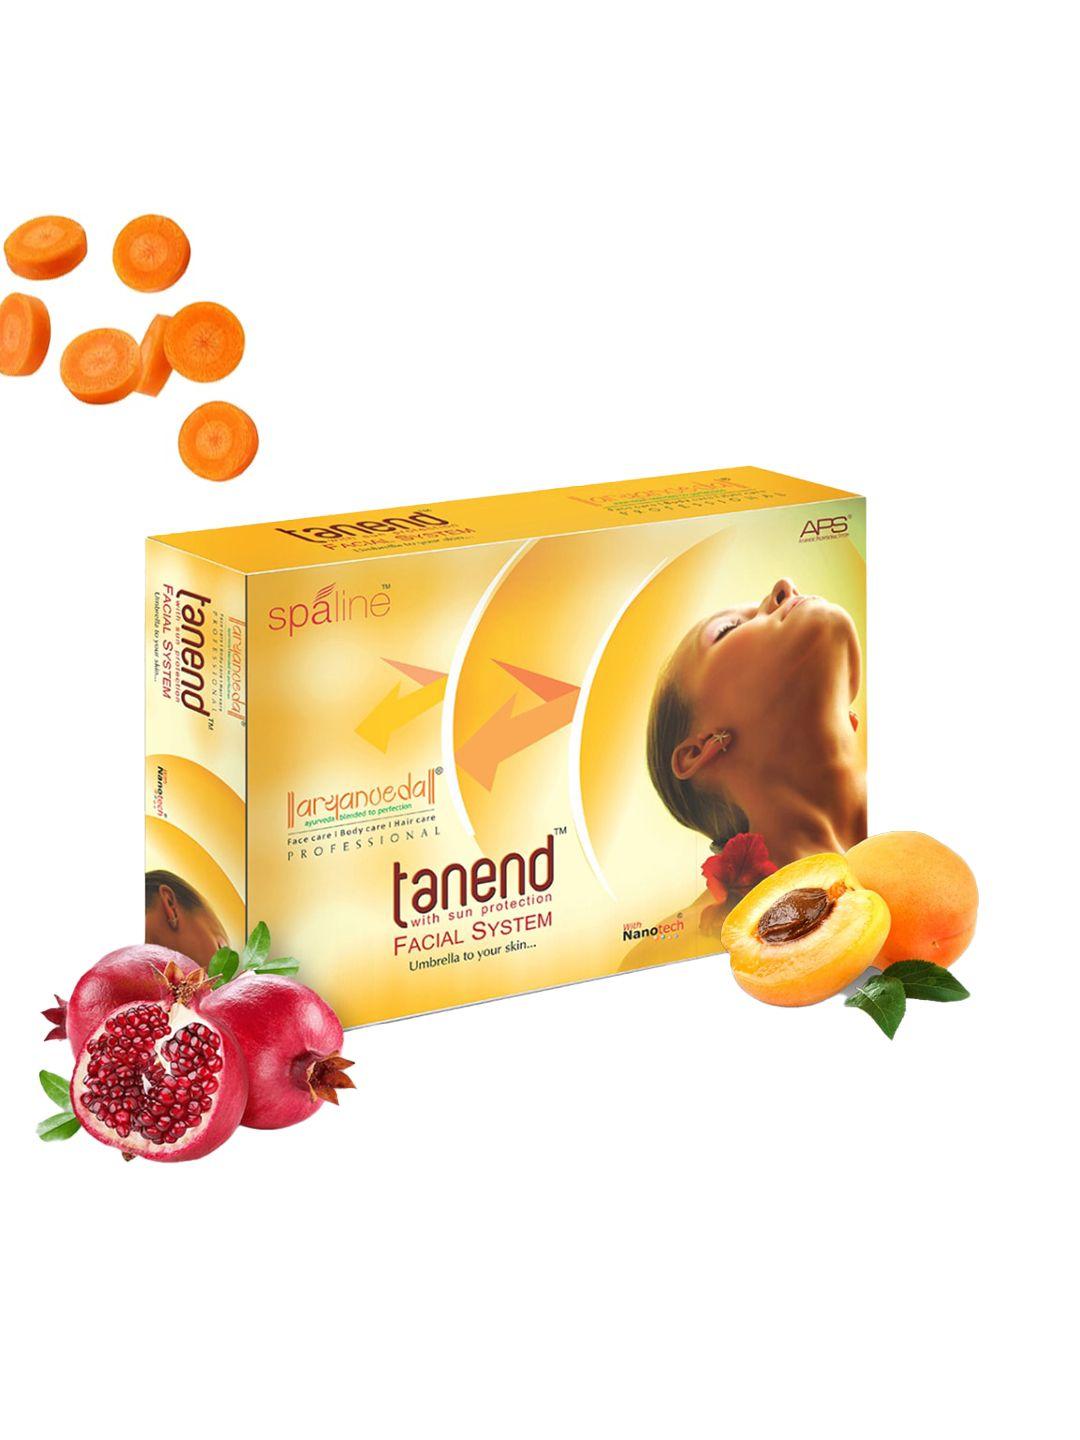 aryanveda tanend facial kit with sun protection - 510g